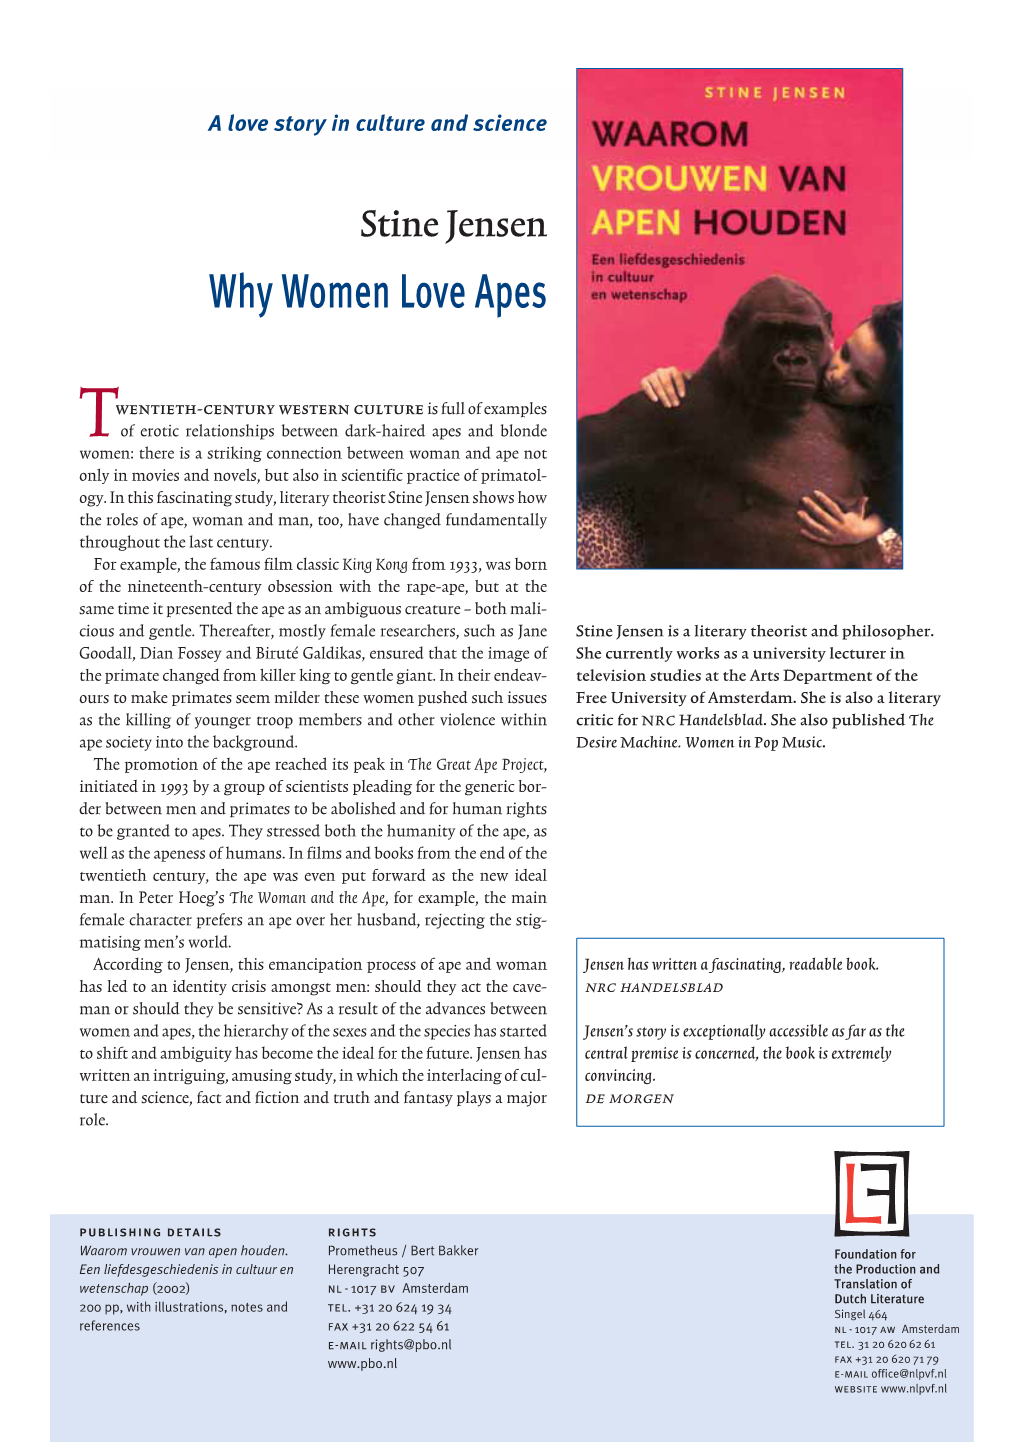 Why Women Love Apes